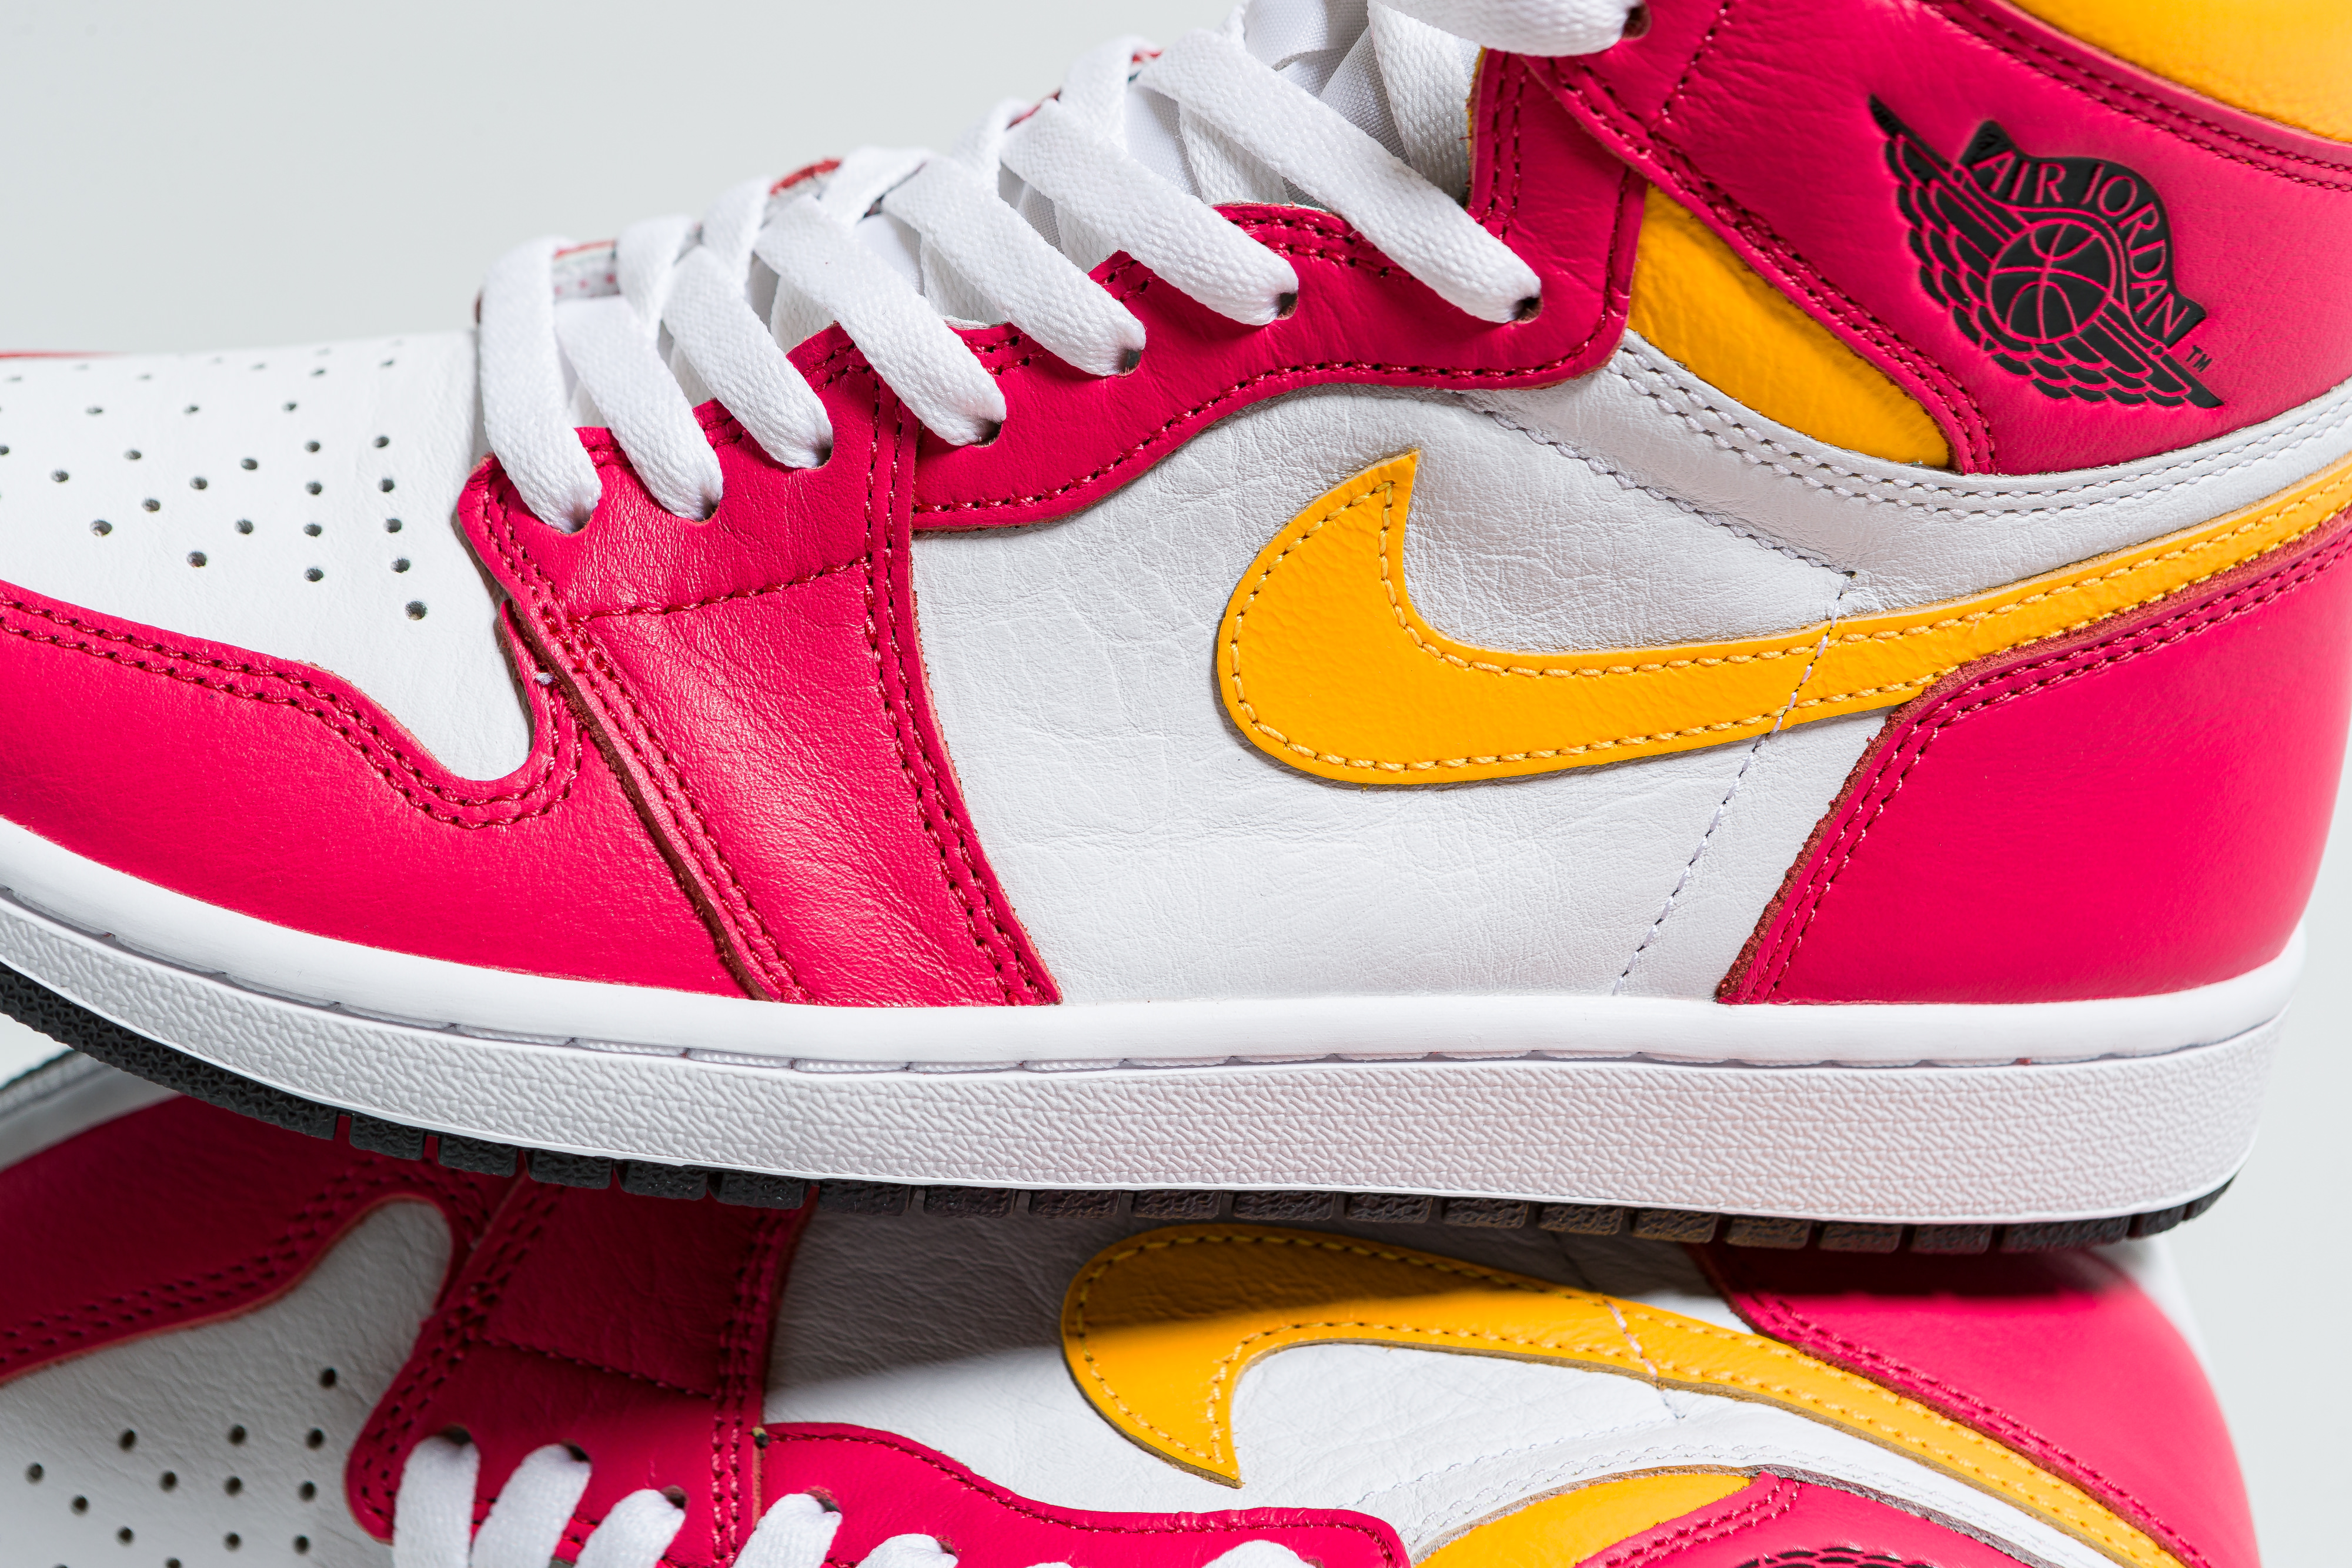 Up There Launches - Nike Air Jordan 1 'Light Fusion Red'